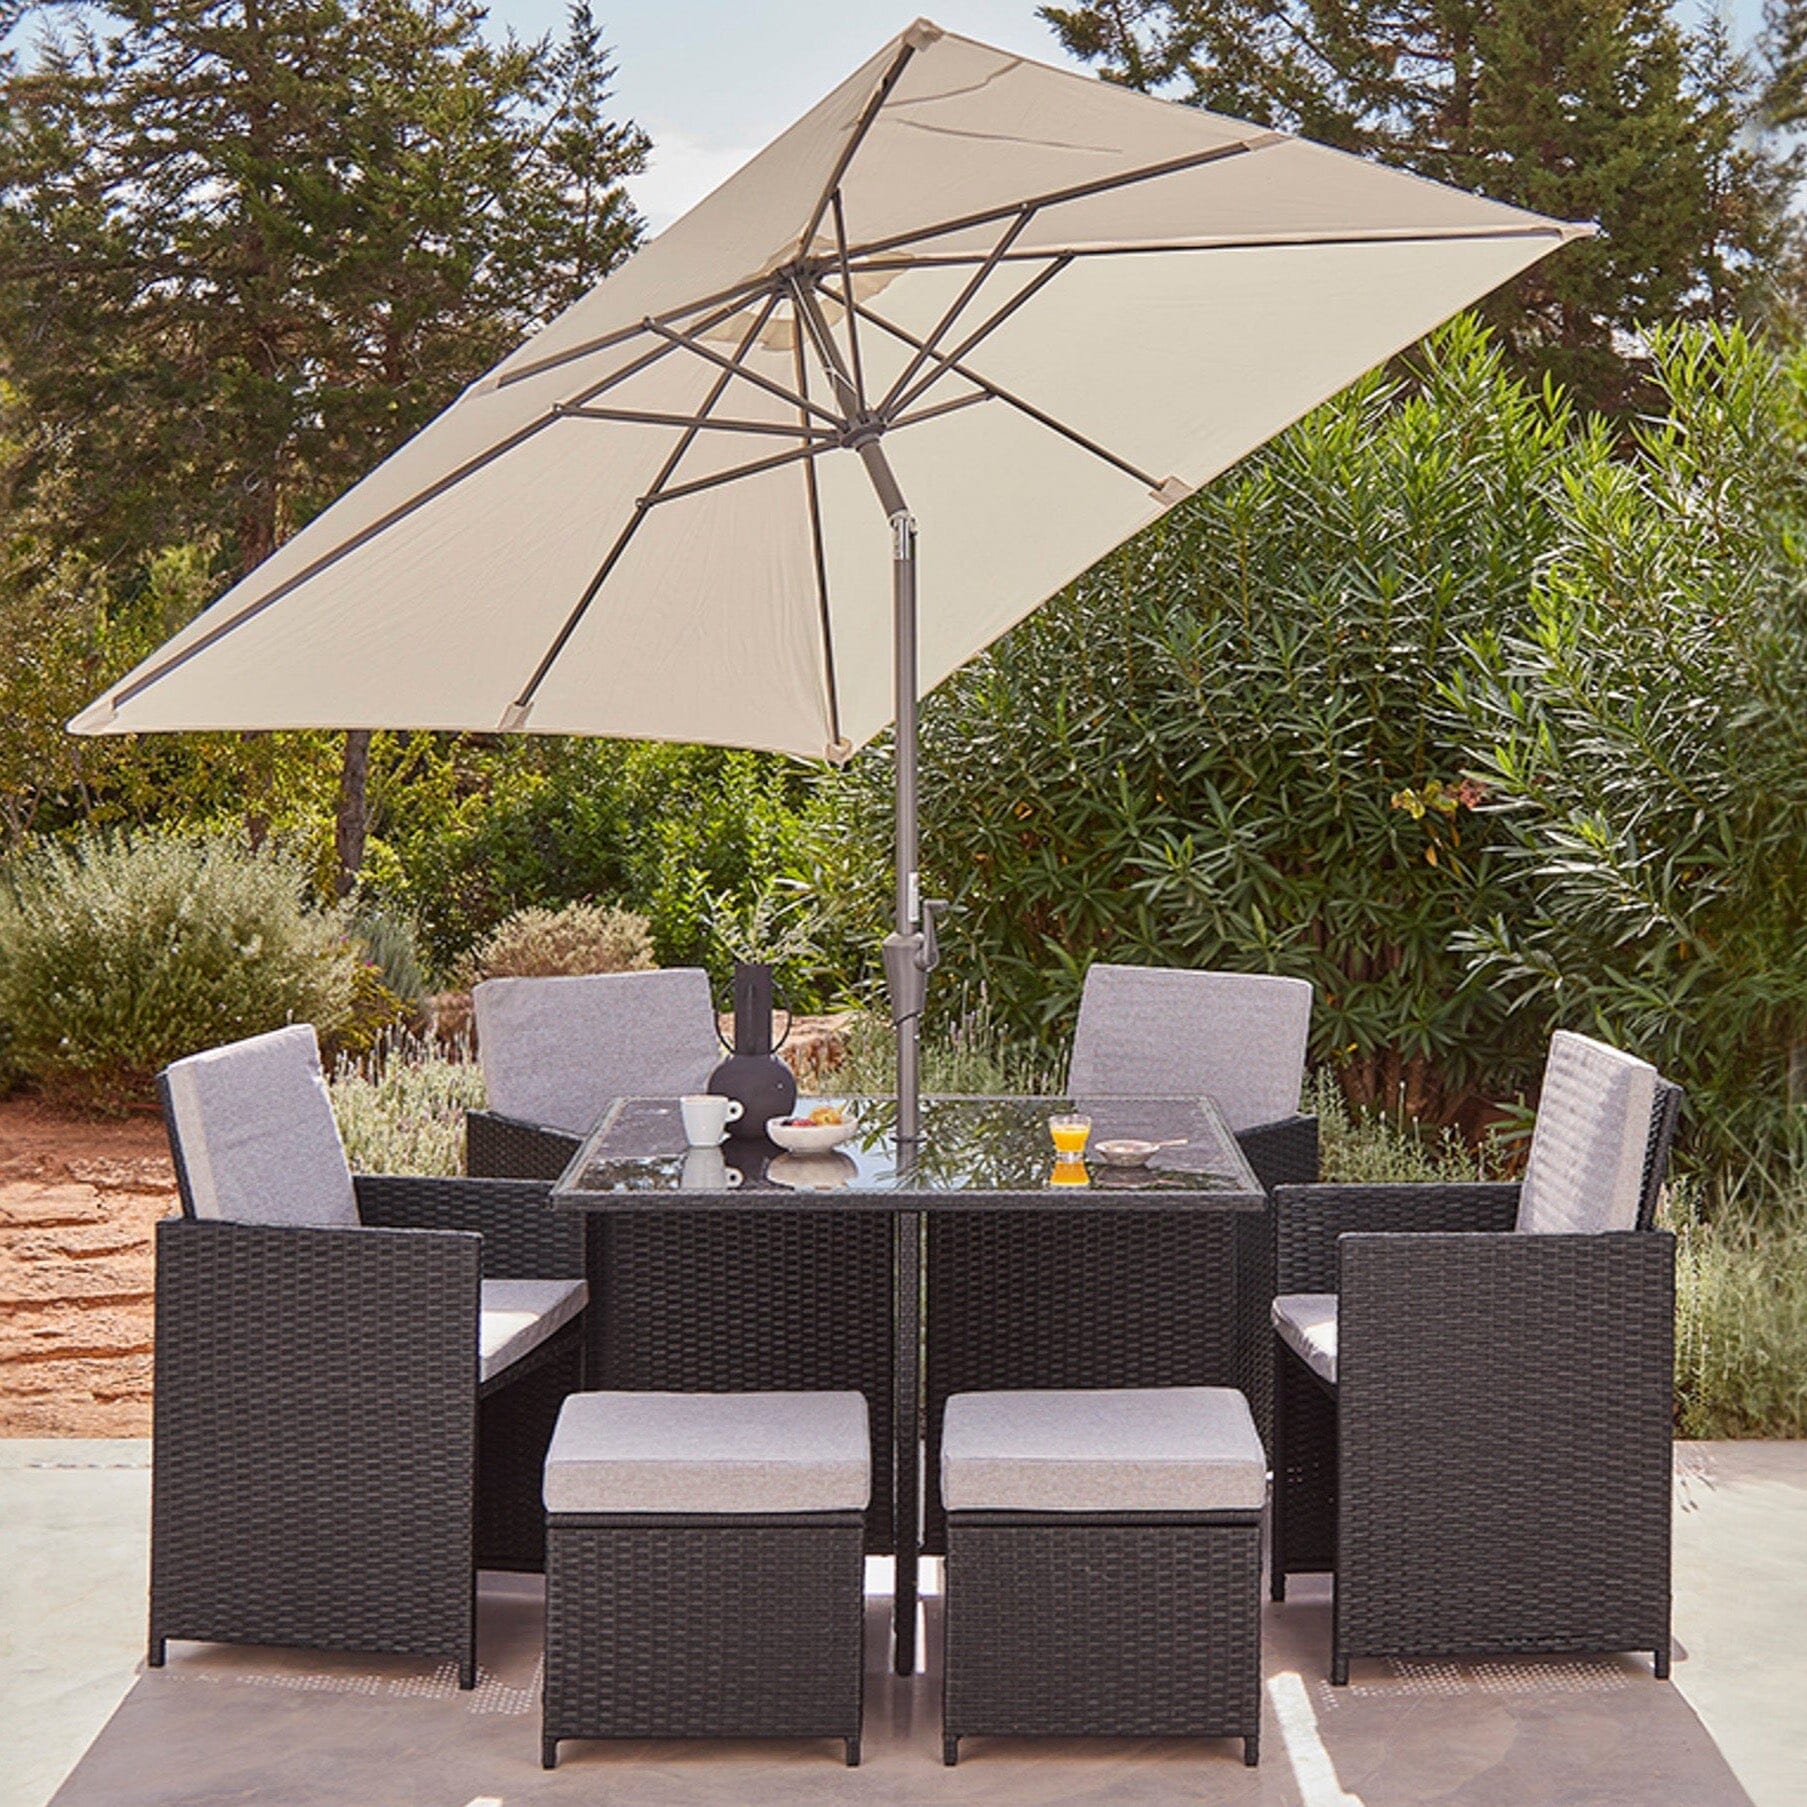 8 Seater Rattan Cube Outdoor Dining Set with Cream Parasol - Black Weave